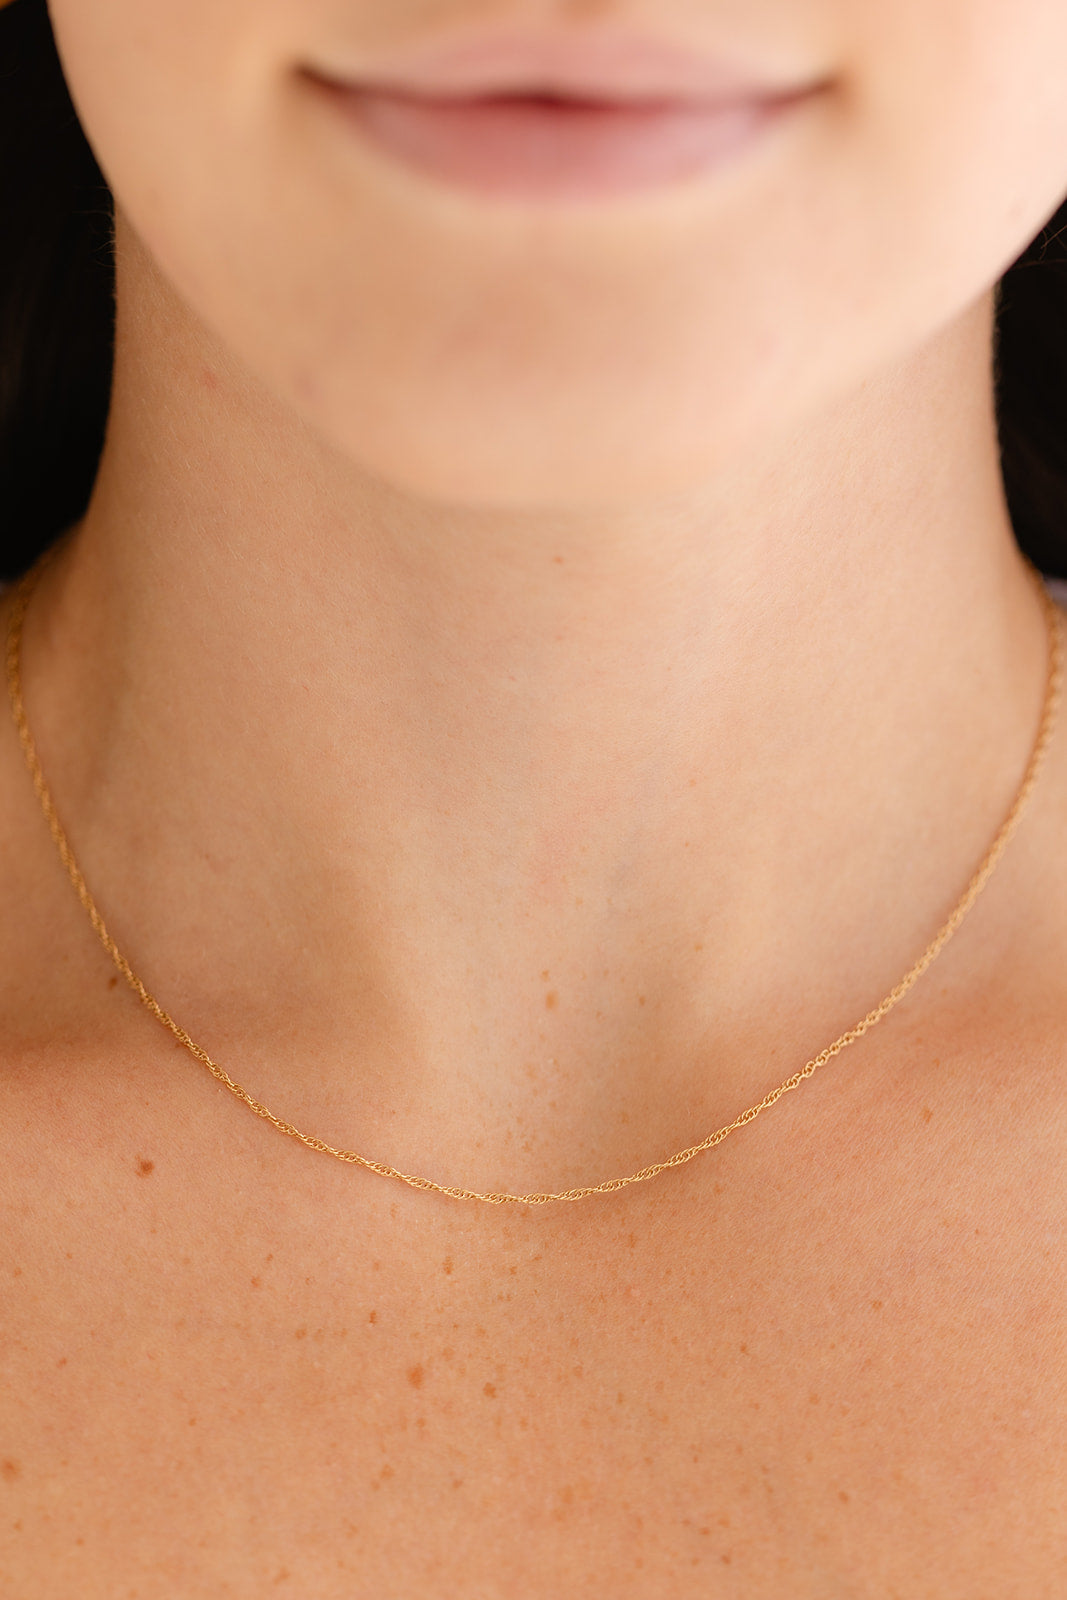 Permanent Gold Chain Necklace